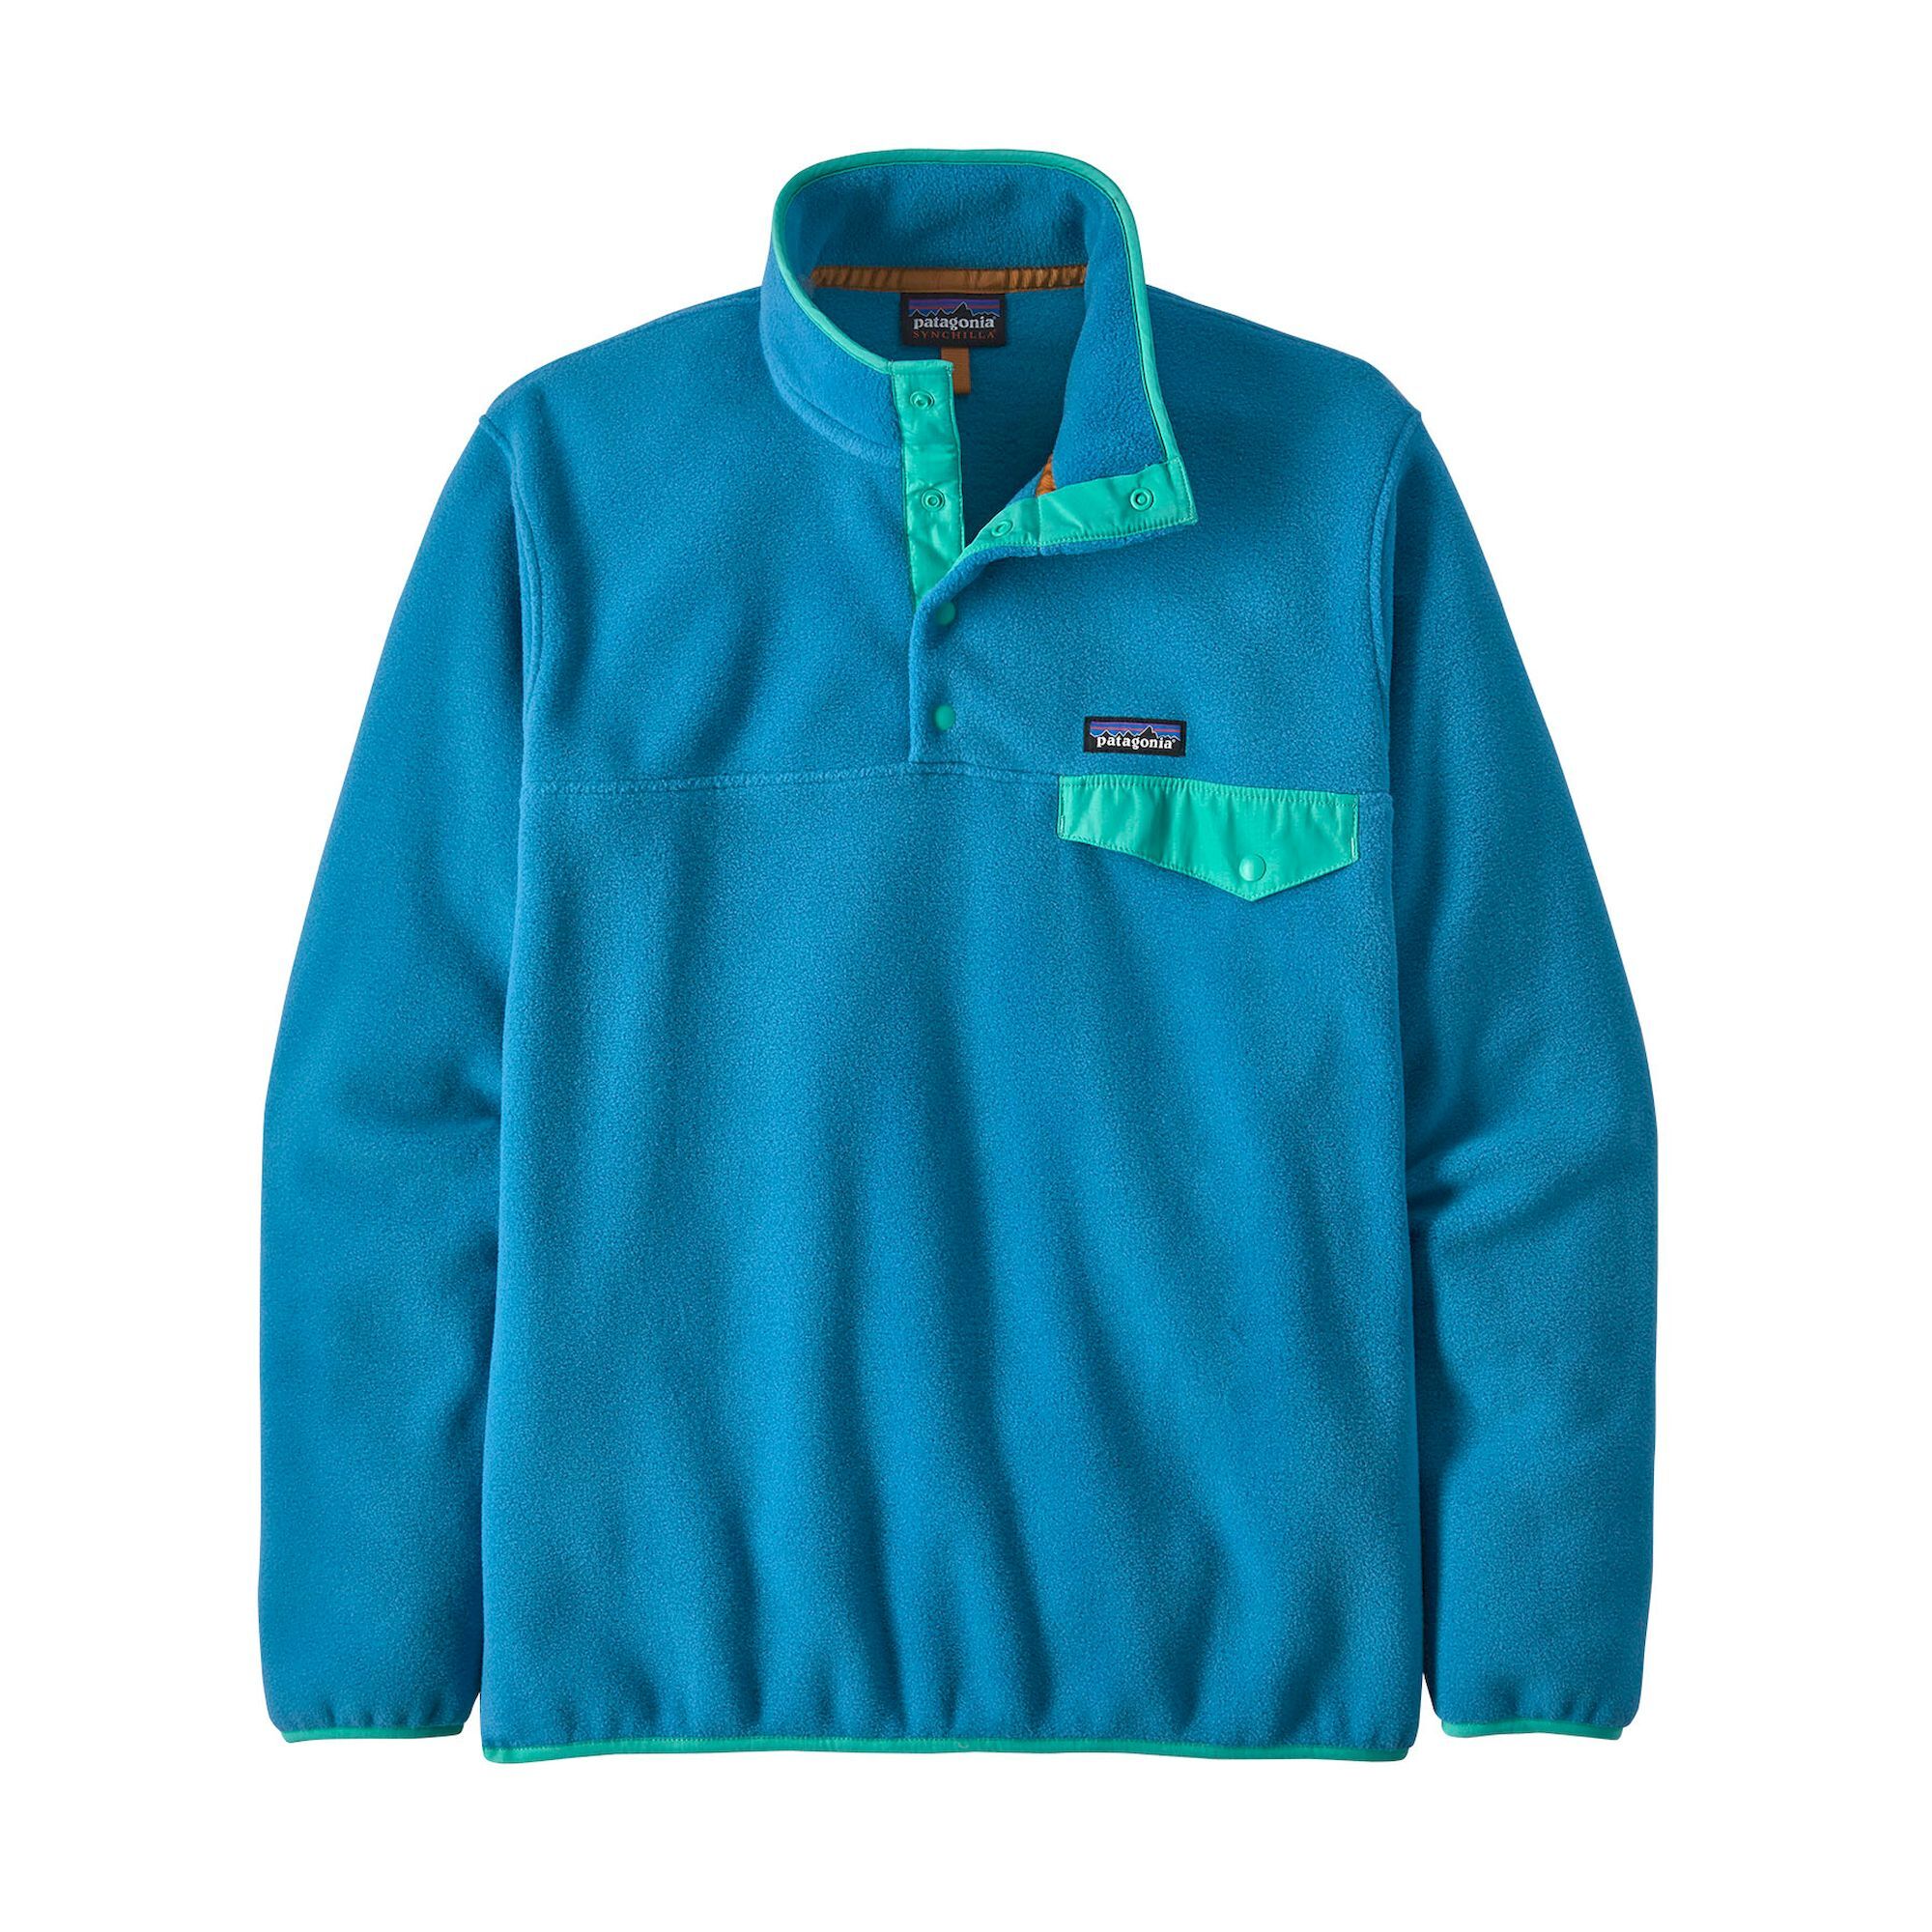 Patagonia - Lightweight Synchilla Snap-T® Pullover - EU Fit - Forro polar - Hombre